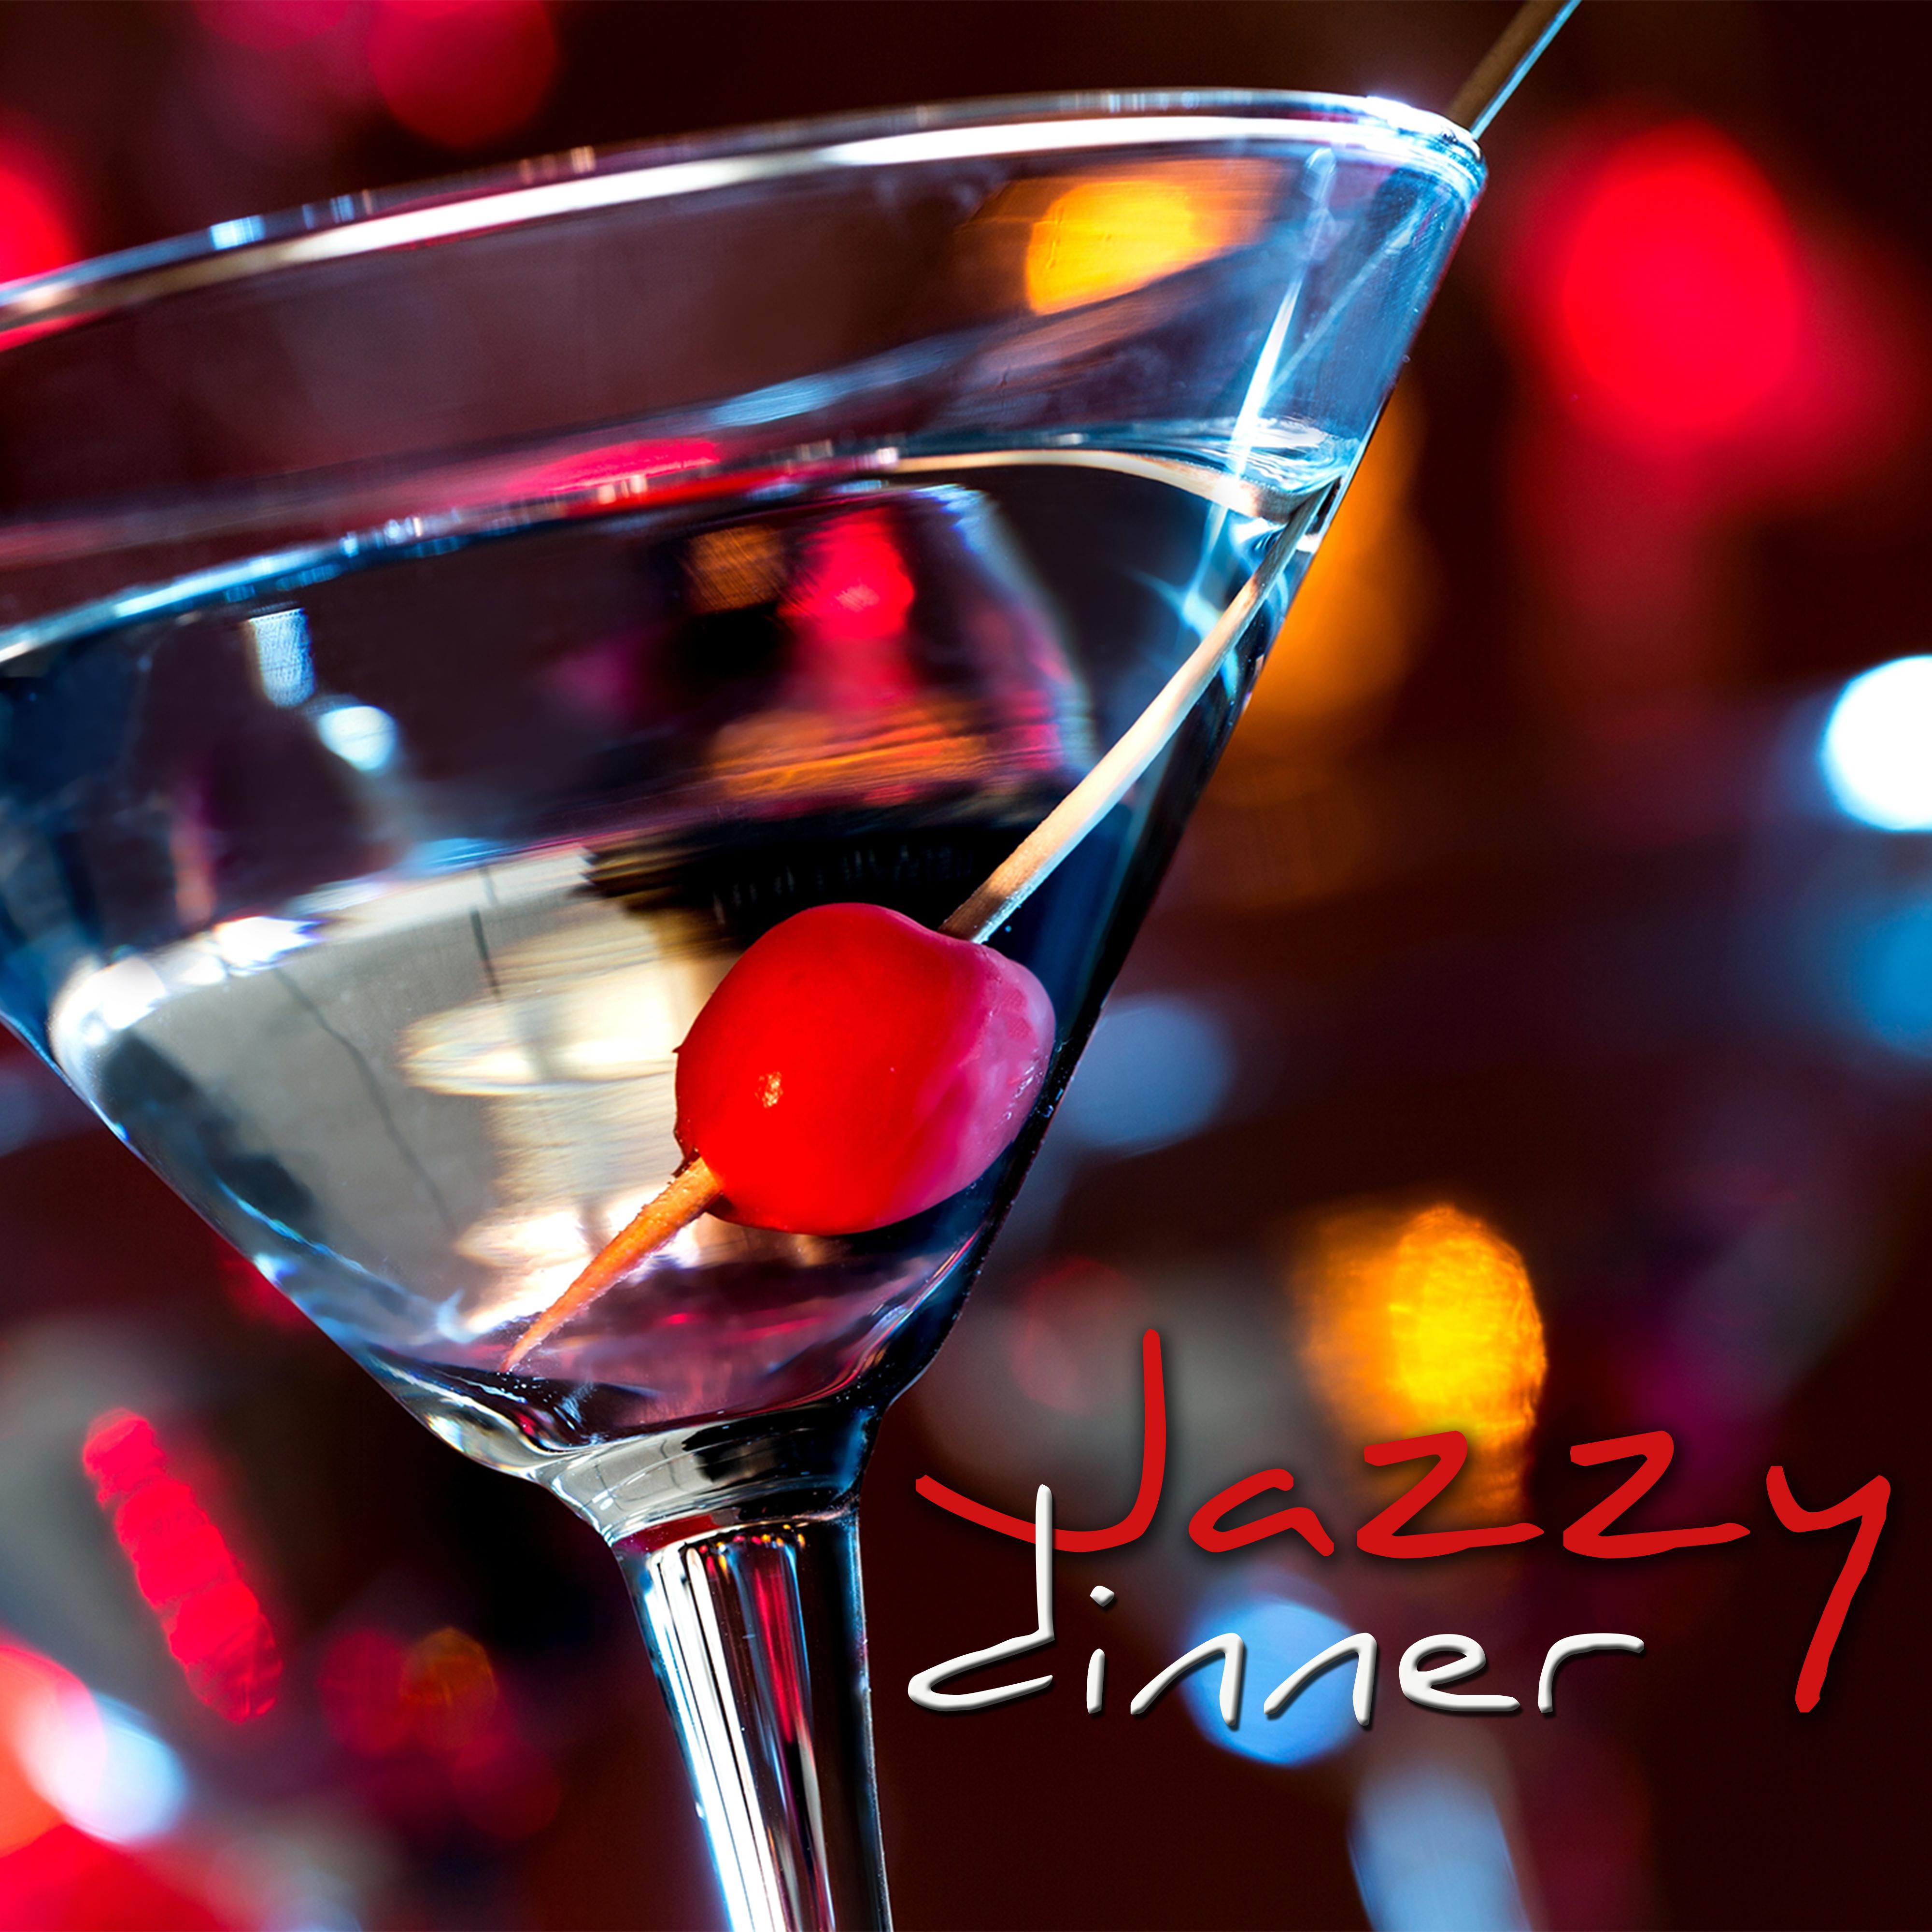 Jazzy Dinner - Smooth & Cool Jazz, Piano, Sax & Guitar Jazz Music, Relaxing Jazz Songs for Drinks & Dinner